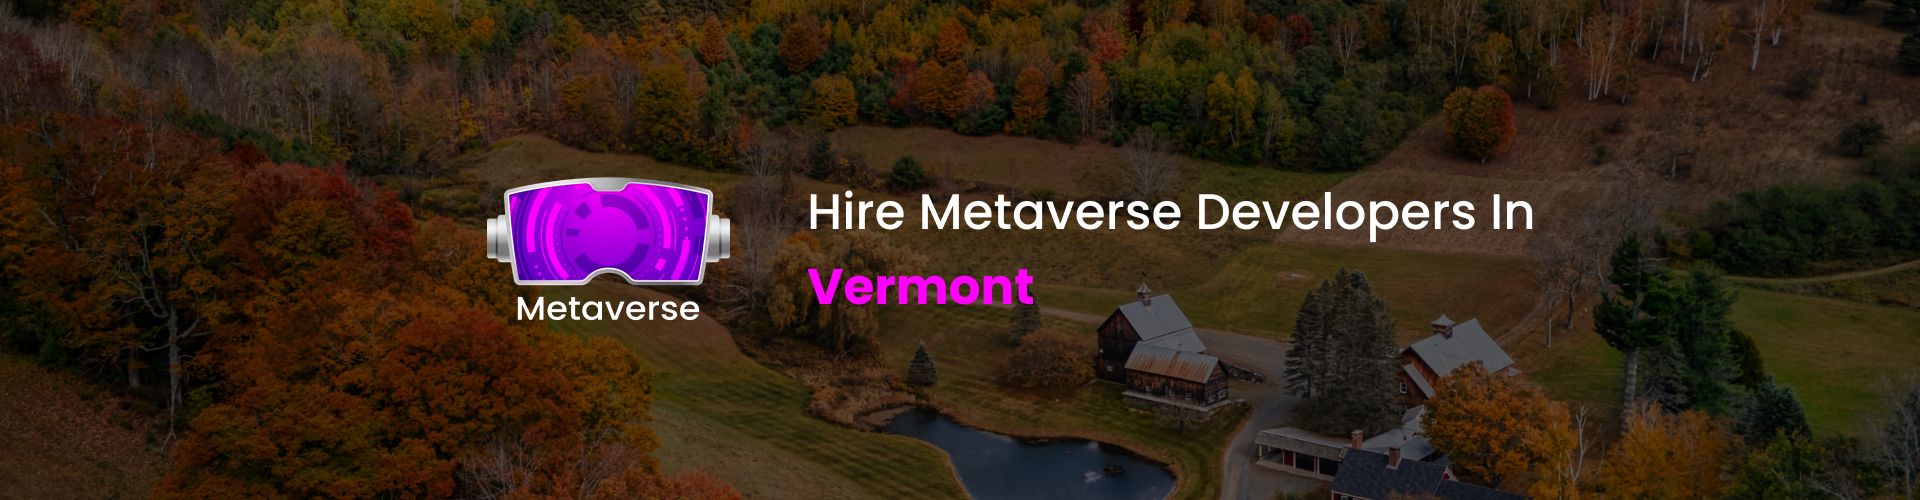 hire metaverse developers in vermont